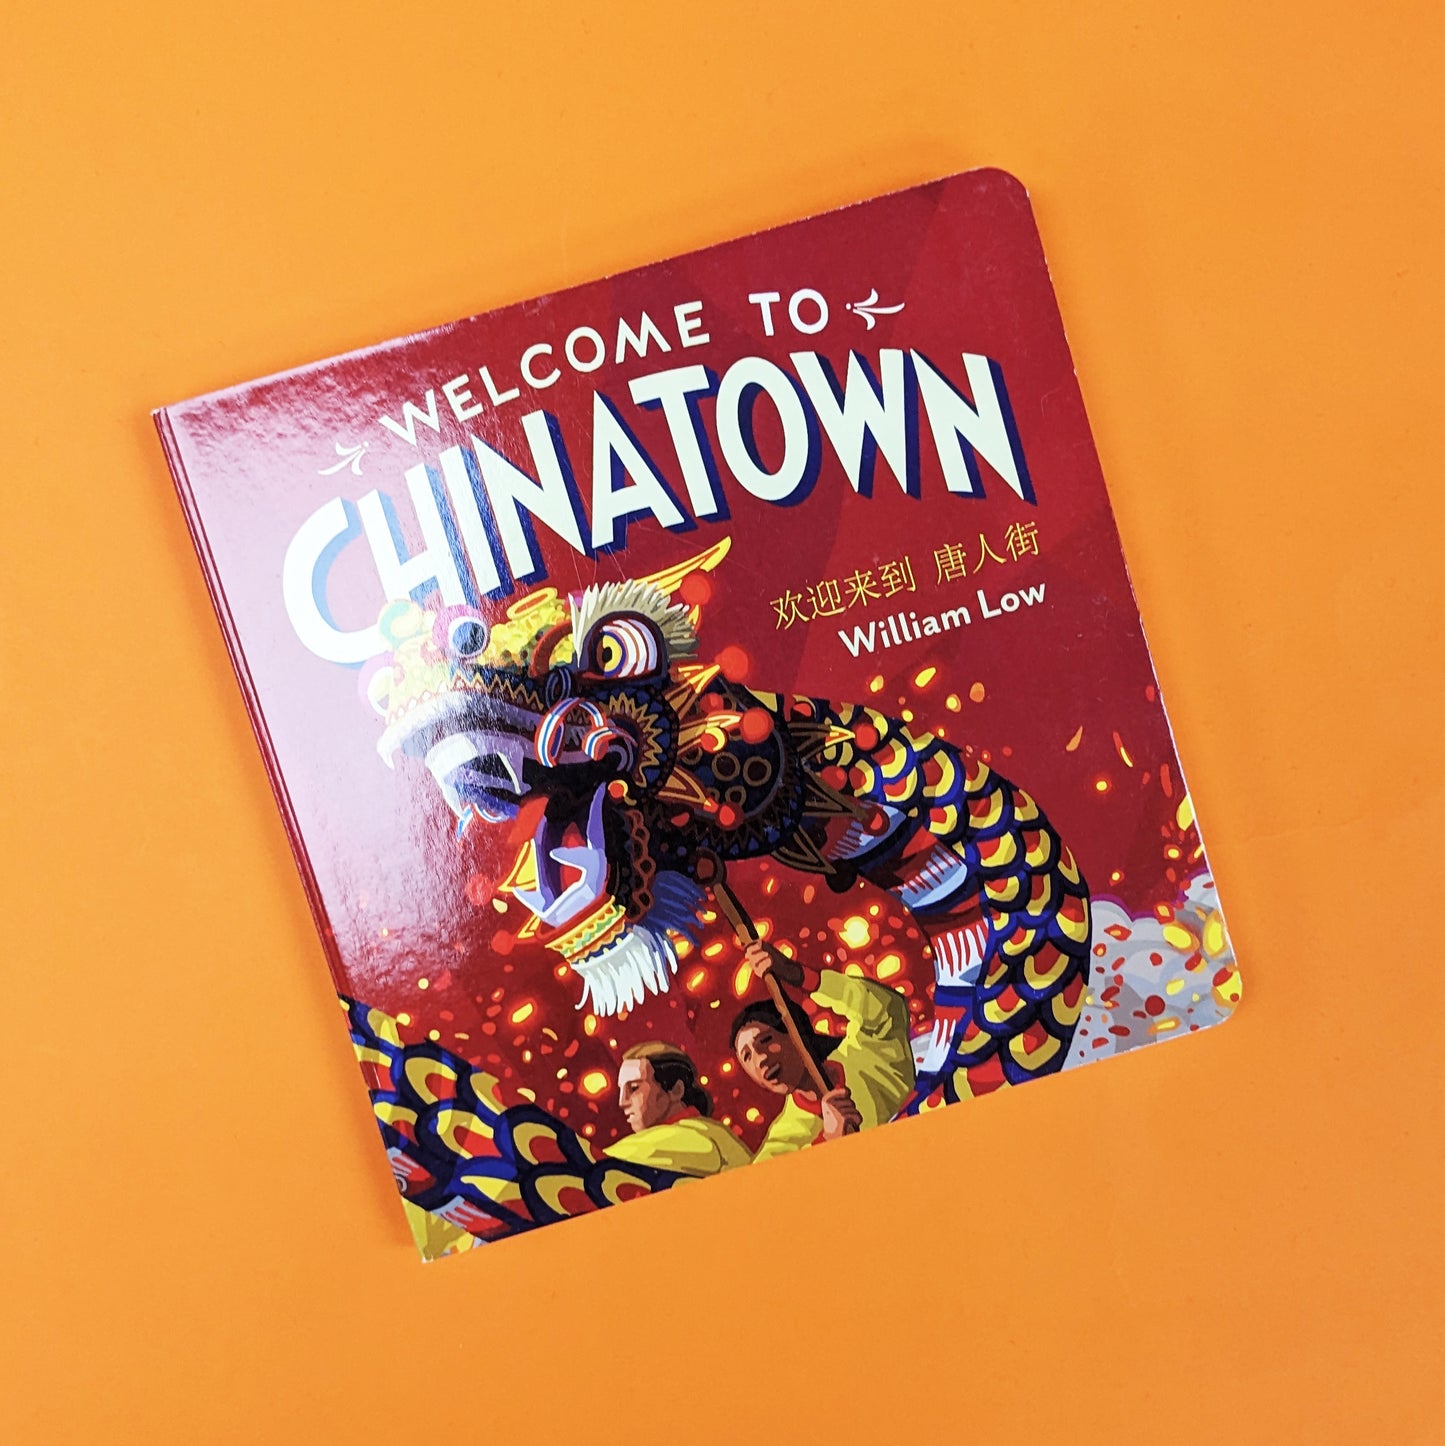 Welcome to Chinatown